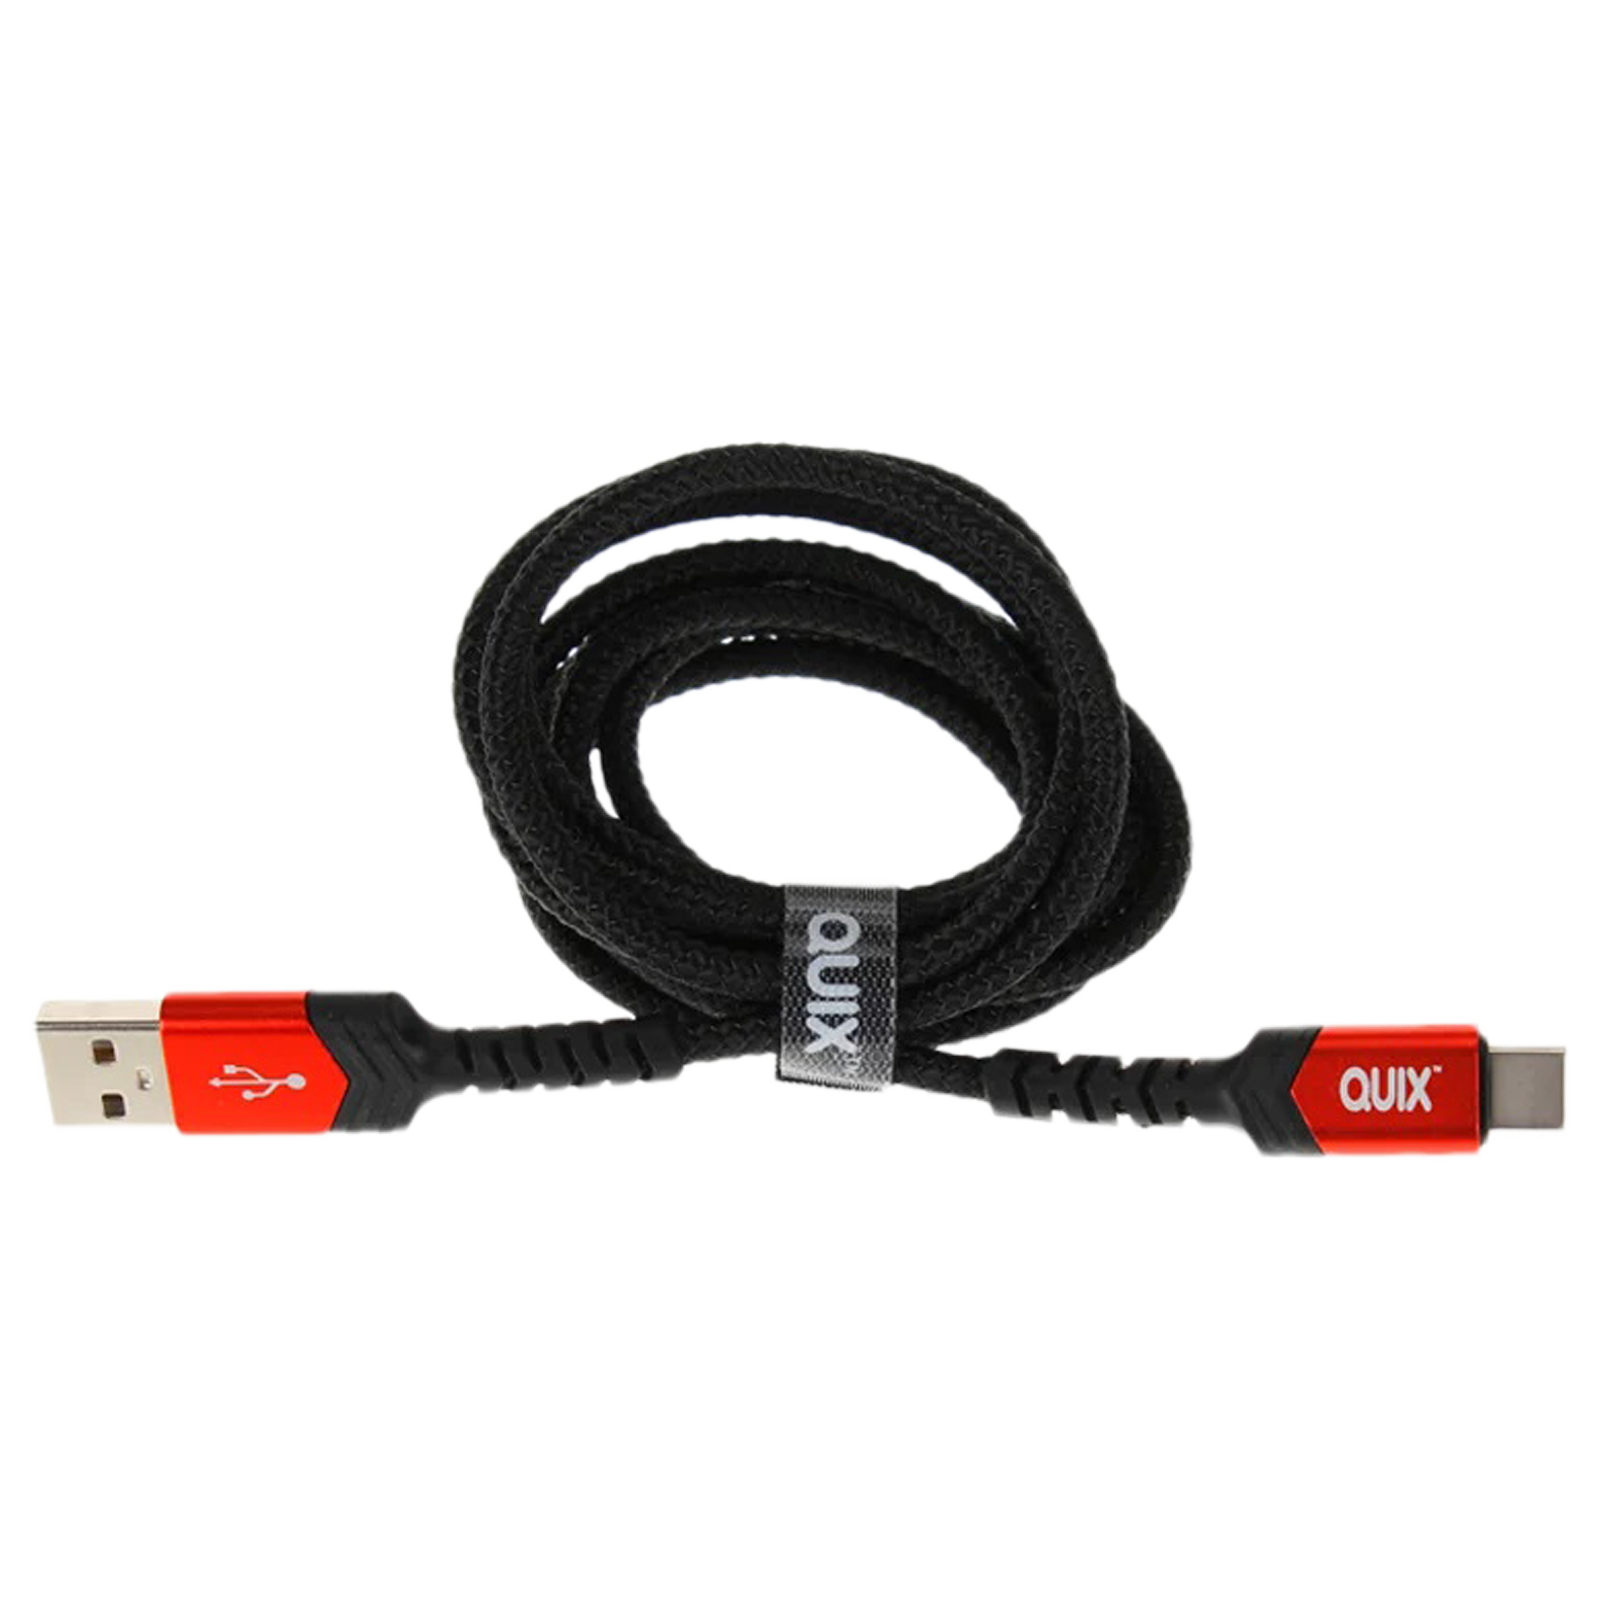 Quix 1.5 Meter USB 3.2 (Type-A) to USB 3.2 (Type-C) Power/Charging and Data Transfer USB Cable (Shielded, QC3AC1001BK, Black)